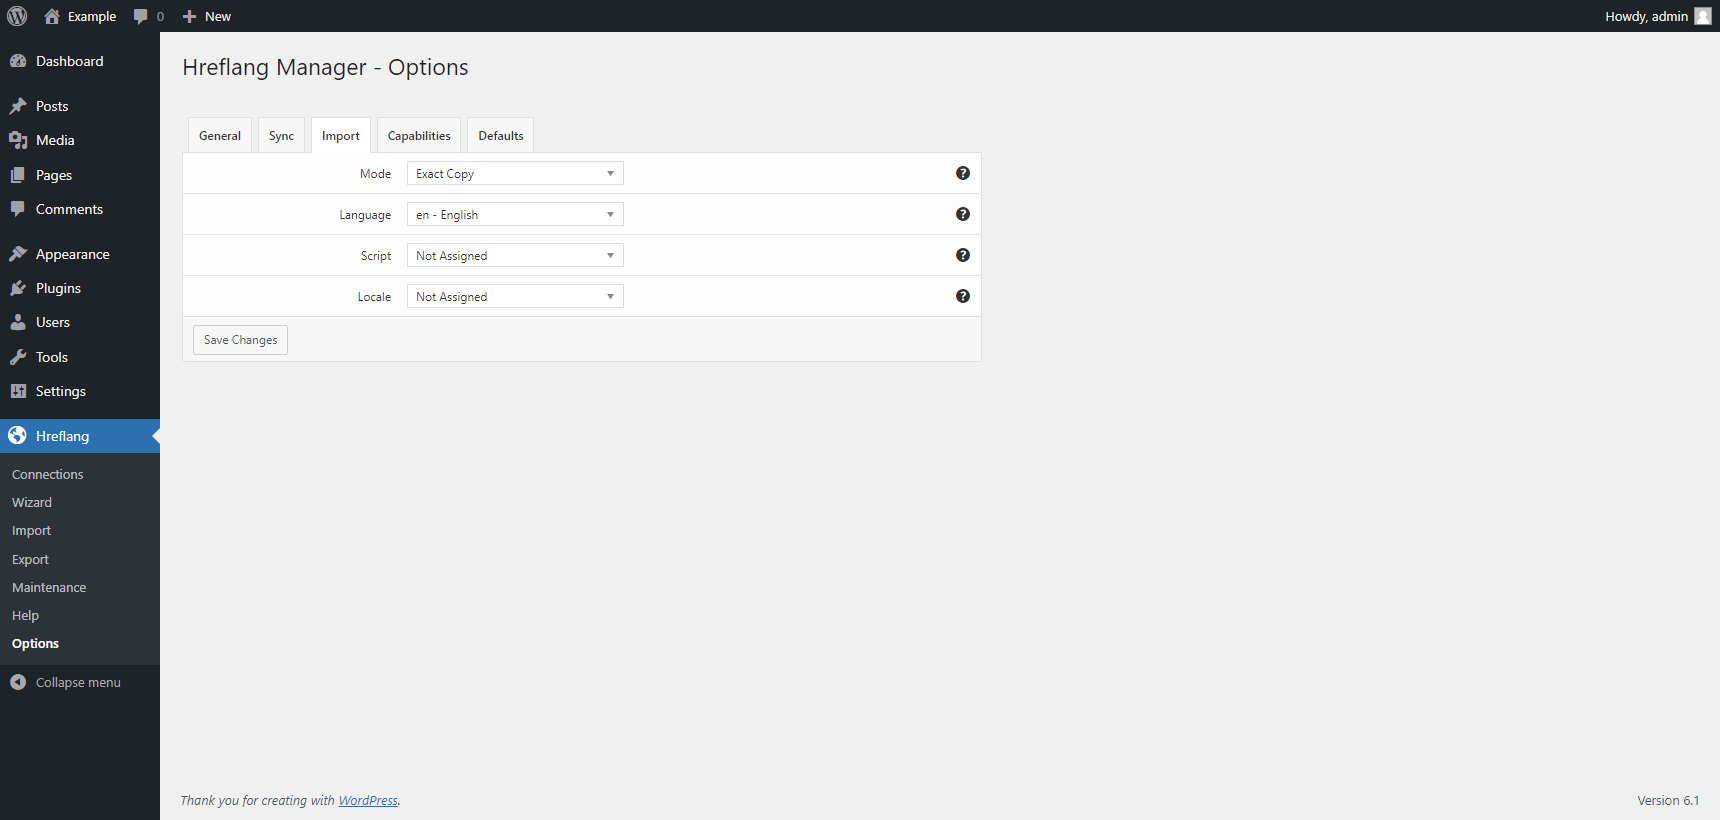 "Import" tab in the plugin options of the Hreflang Manager plugin for WordPress.